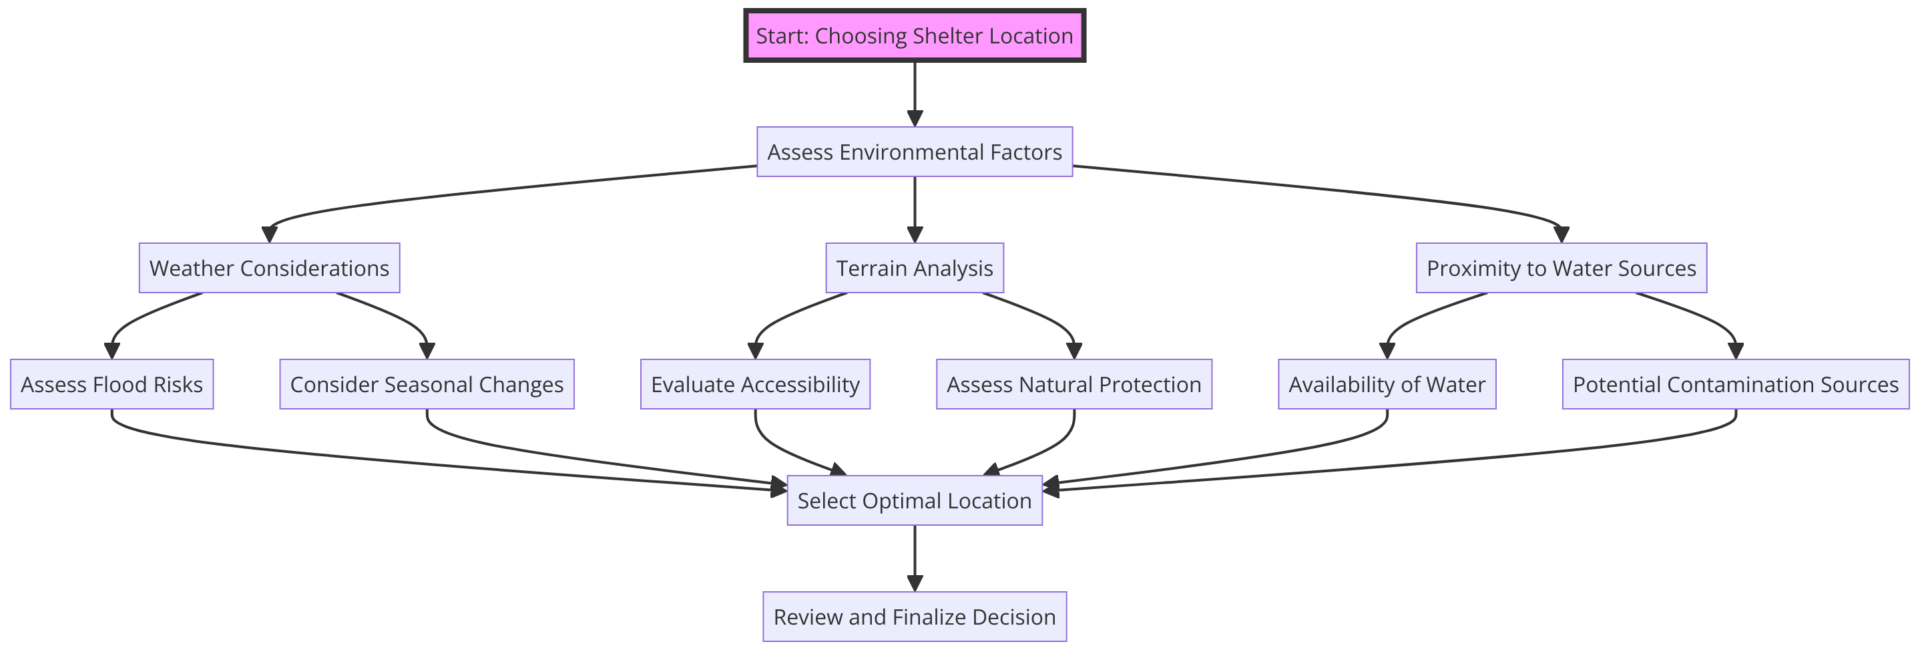 the decision-making process for choosing a shelter location based on a more compact design